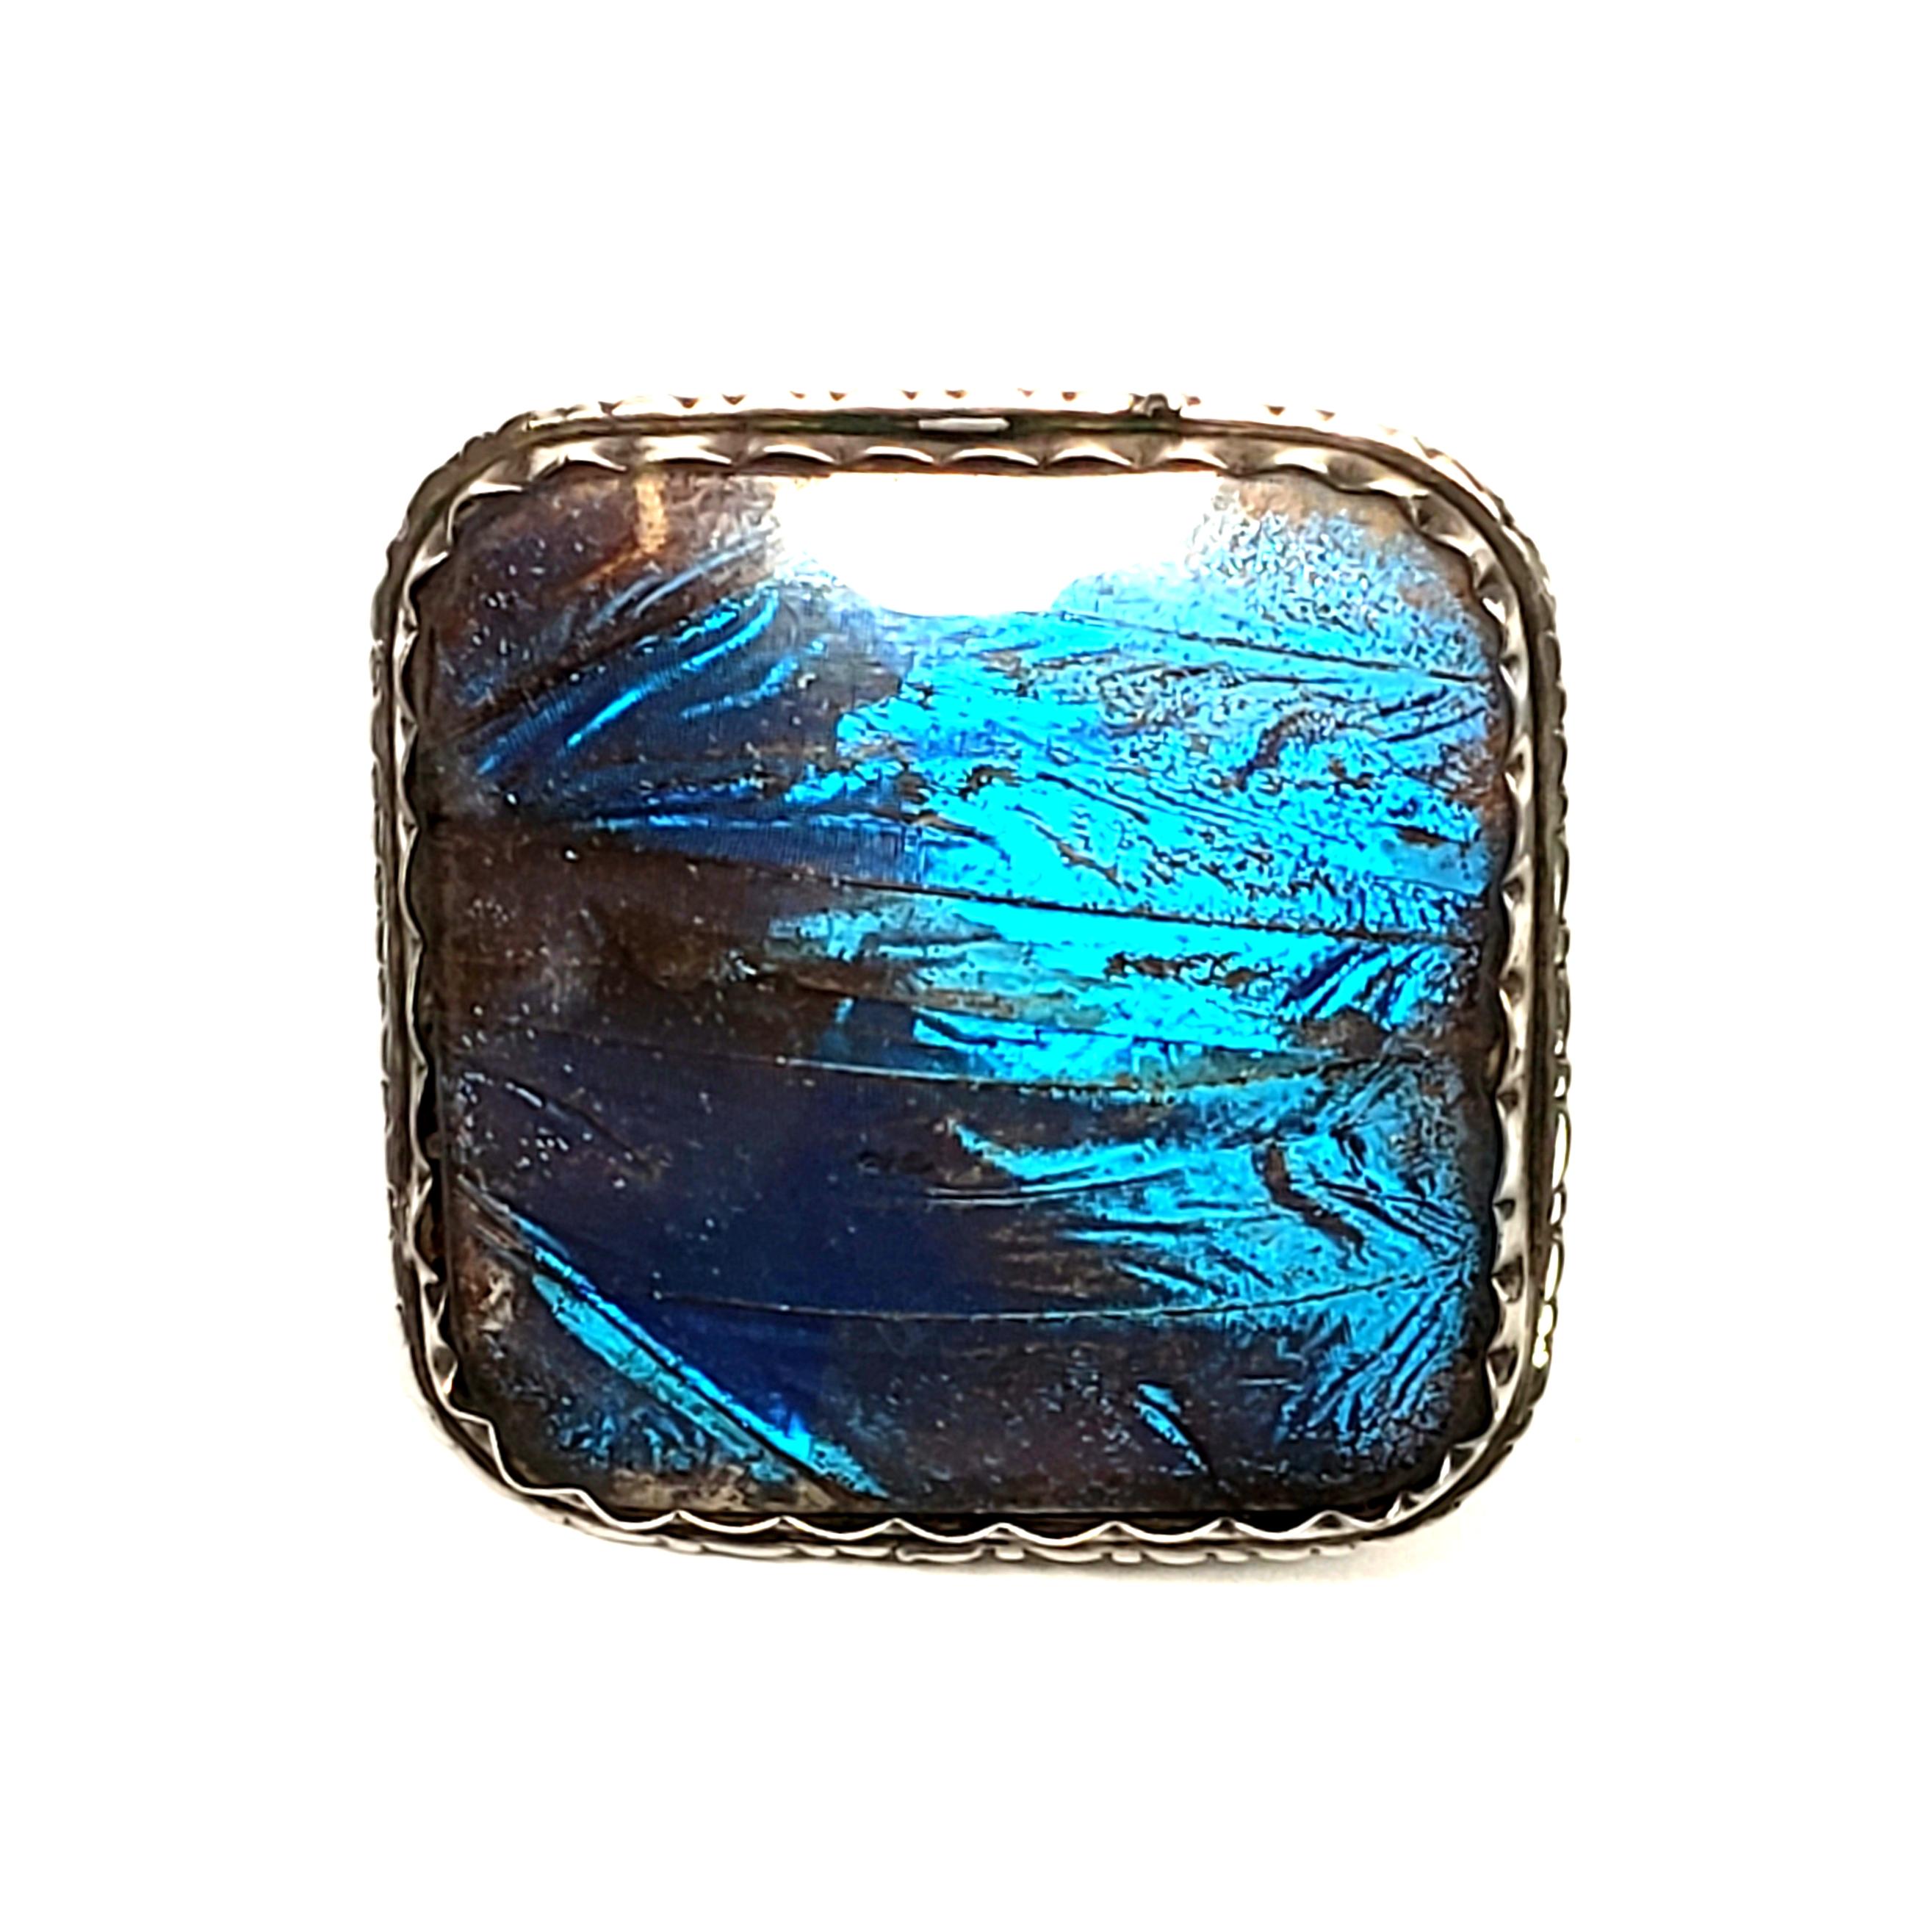 Vintage 900 silver blue butterfly wing pin by Zitrin Brasil.

Beautiful iridescent blue butterfly wing under clear dome, bezel set in square 900 silver frame.

Measures approx 1 3/8